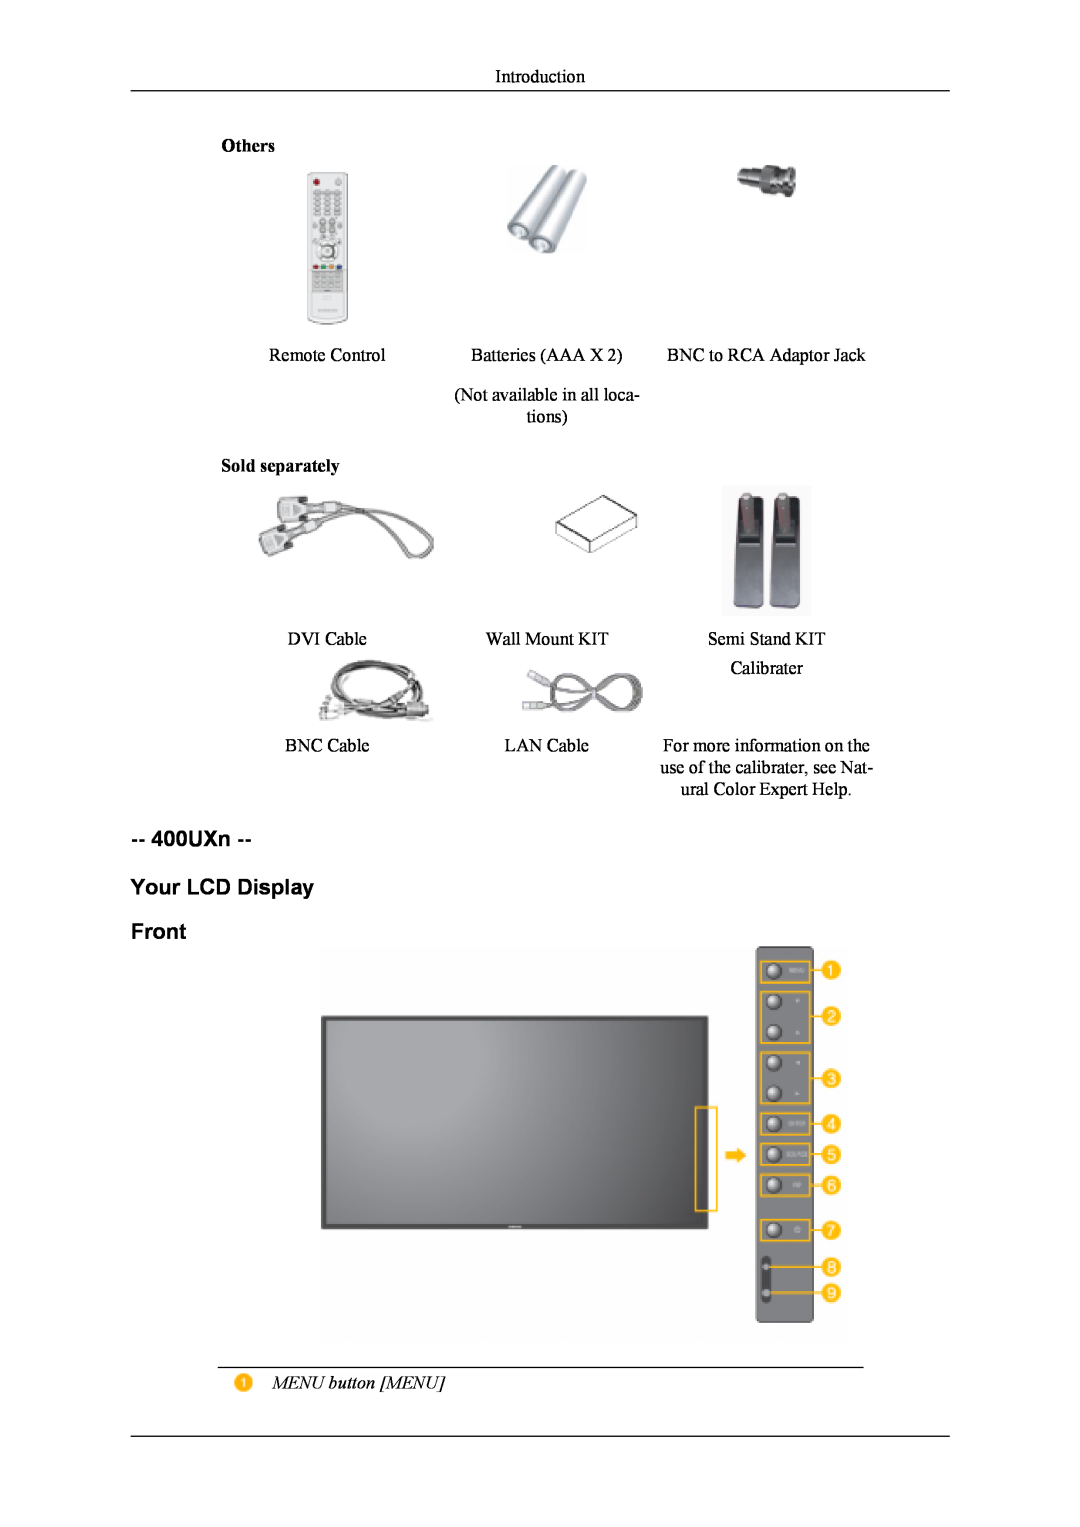 Samsung user manual 400UXn Your LCD Display Front, Others, Sold separately 